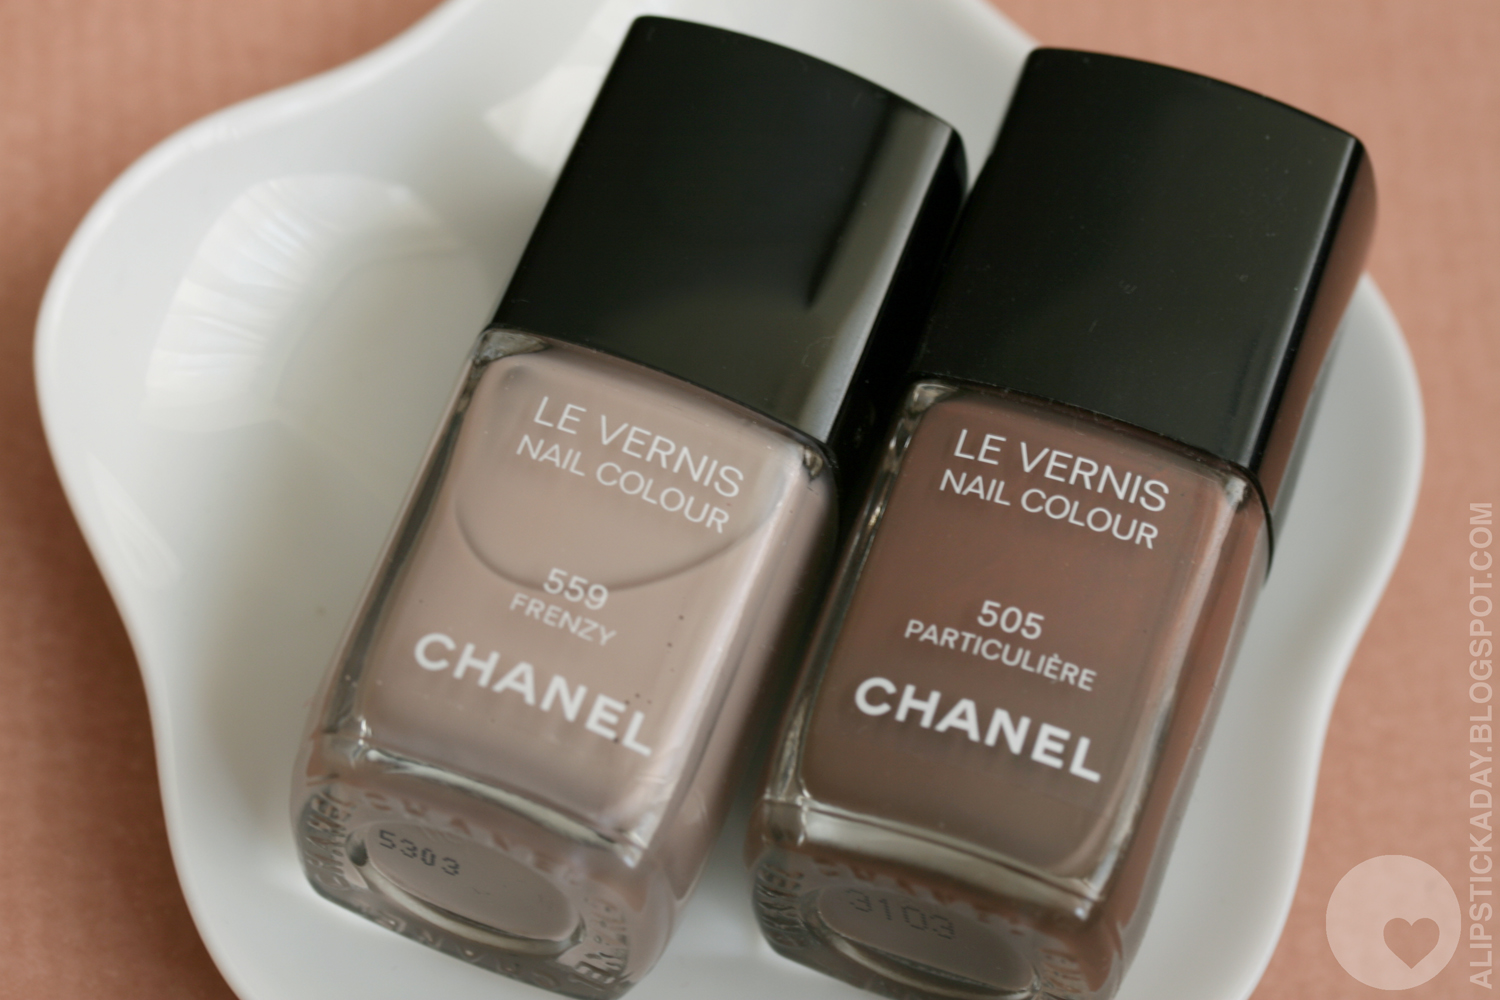 Chanel Le Vernis Longwear Nail Colour in Frenzy - wide 6